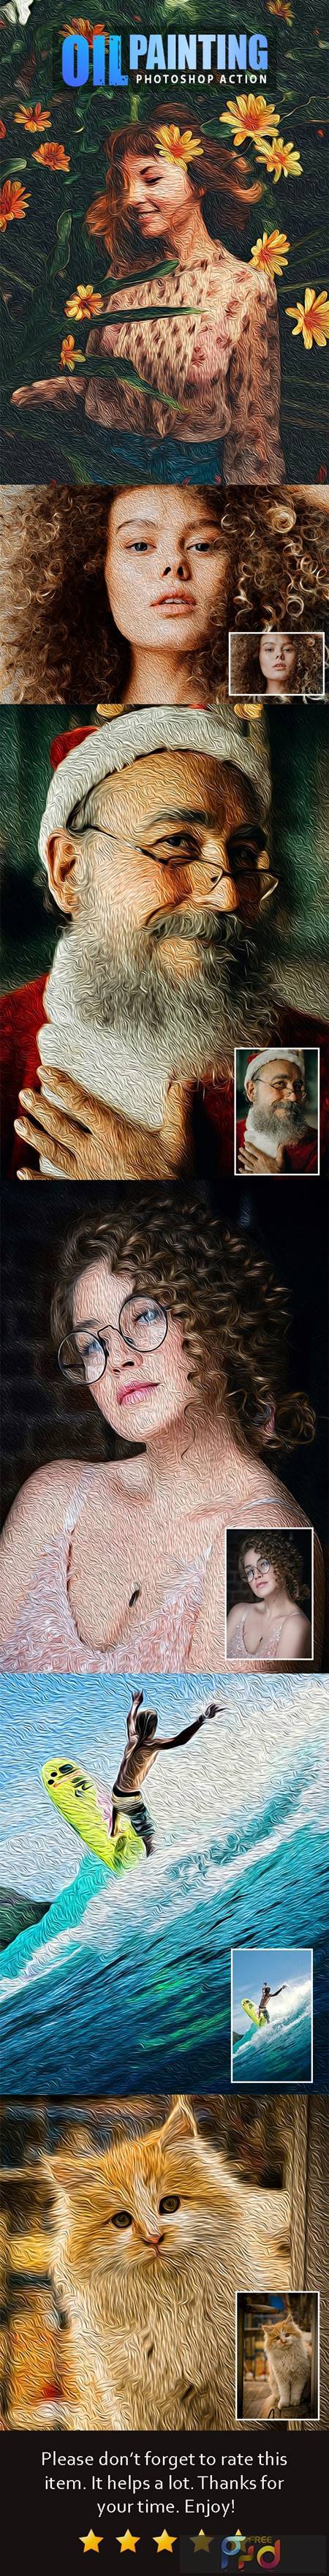 Oil Painting Photoshop Action 32309443 1